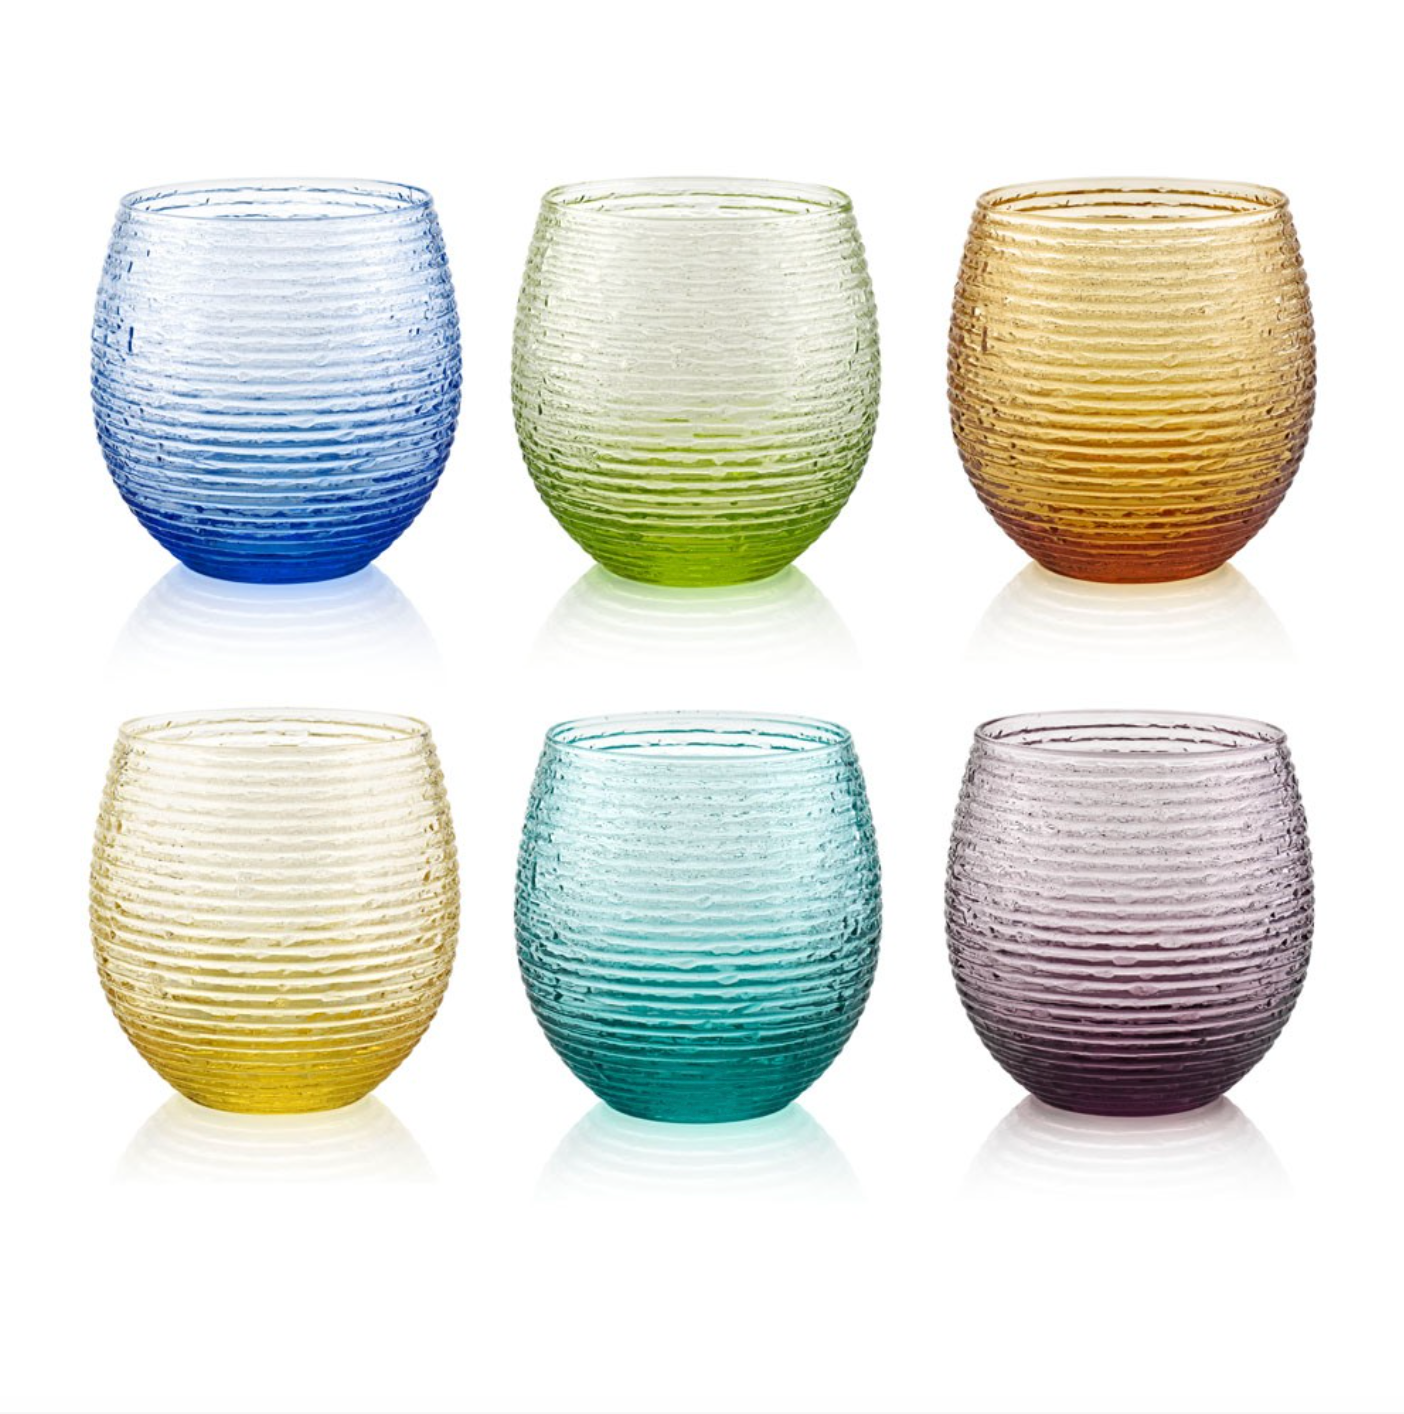 IVV Multicolor Set of 6 Water Glasses Assorted Colors in Gift Box